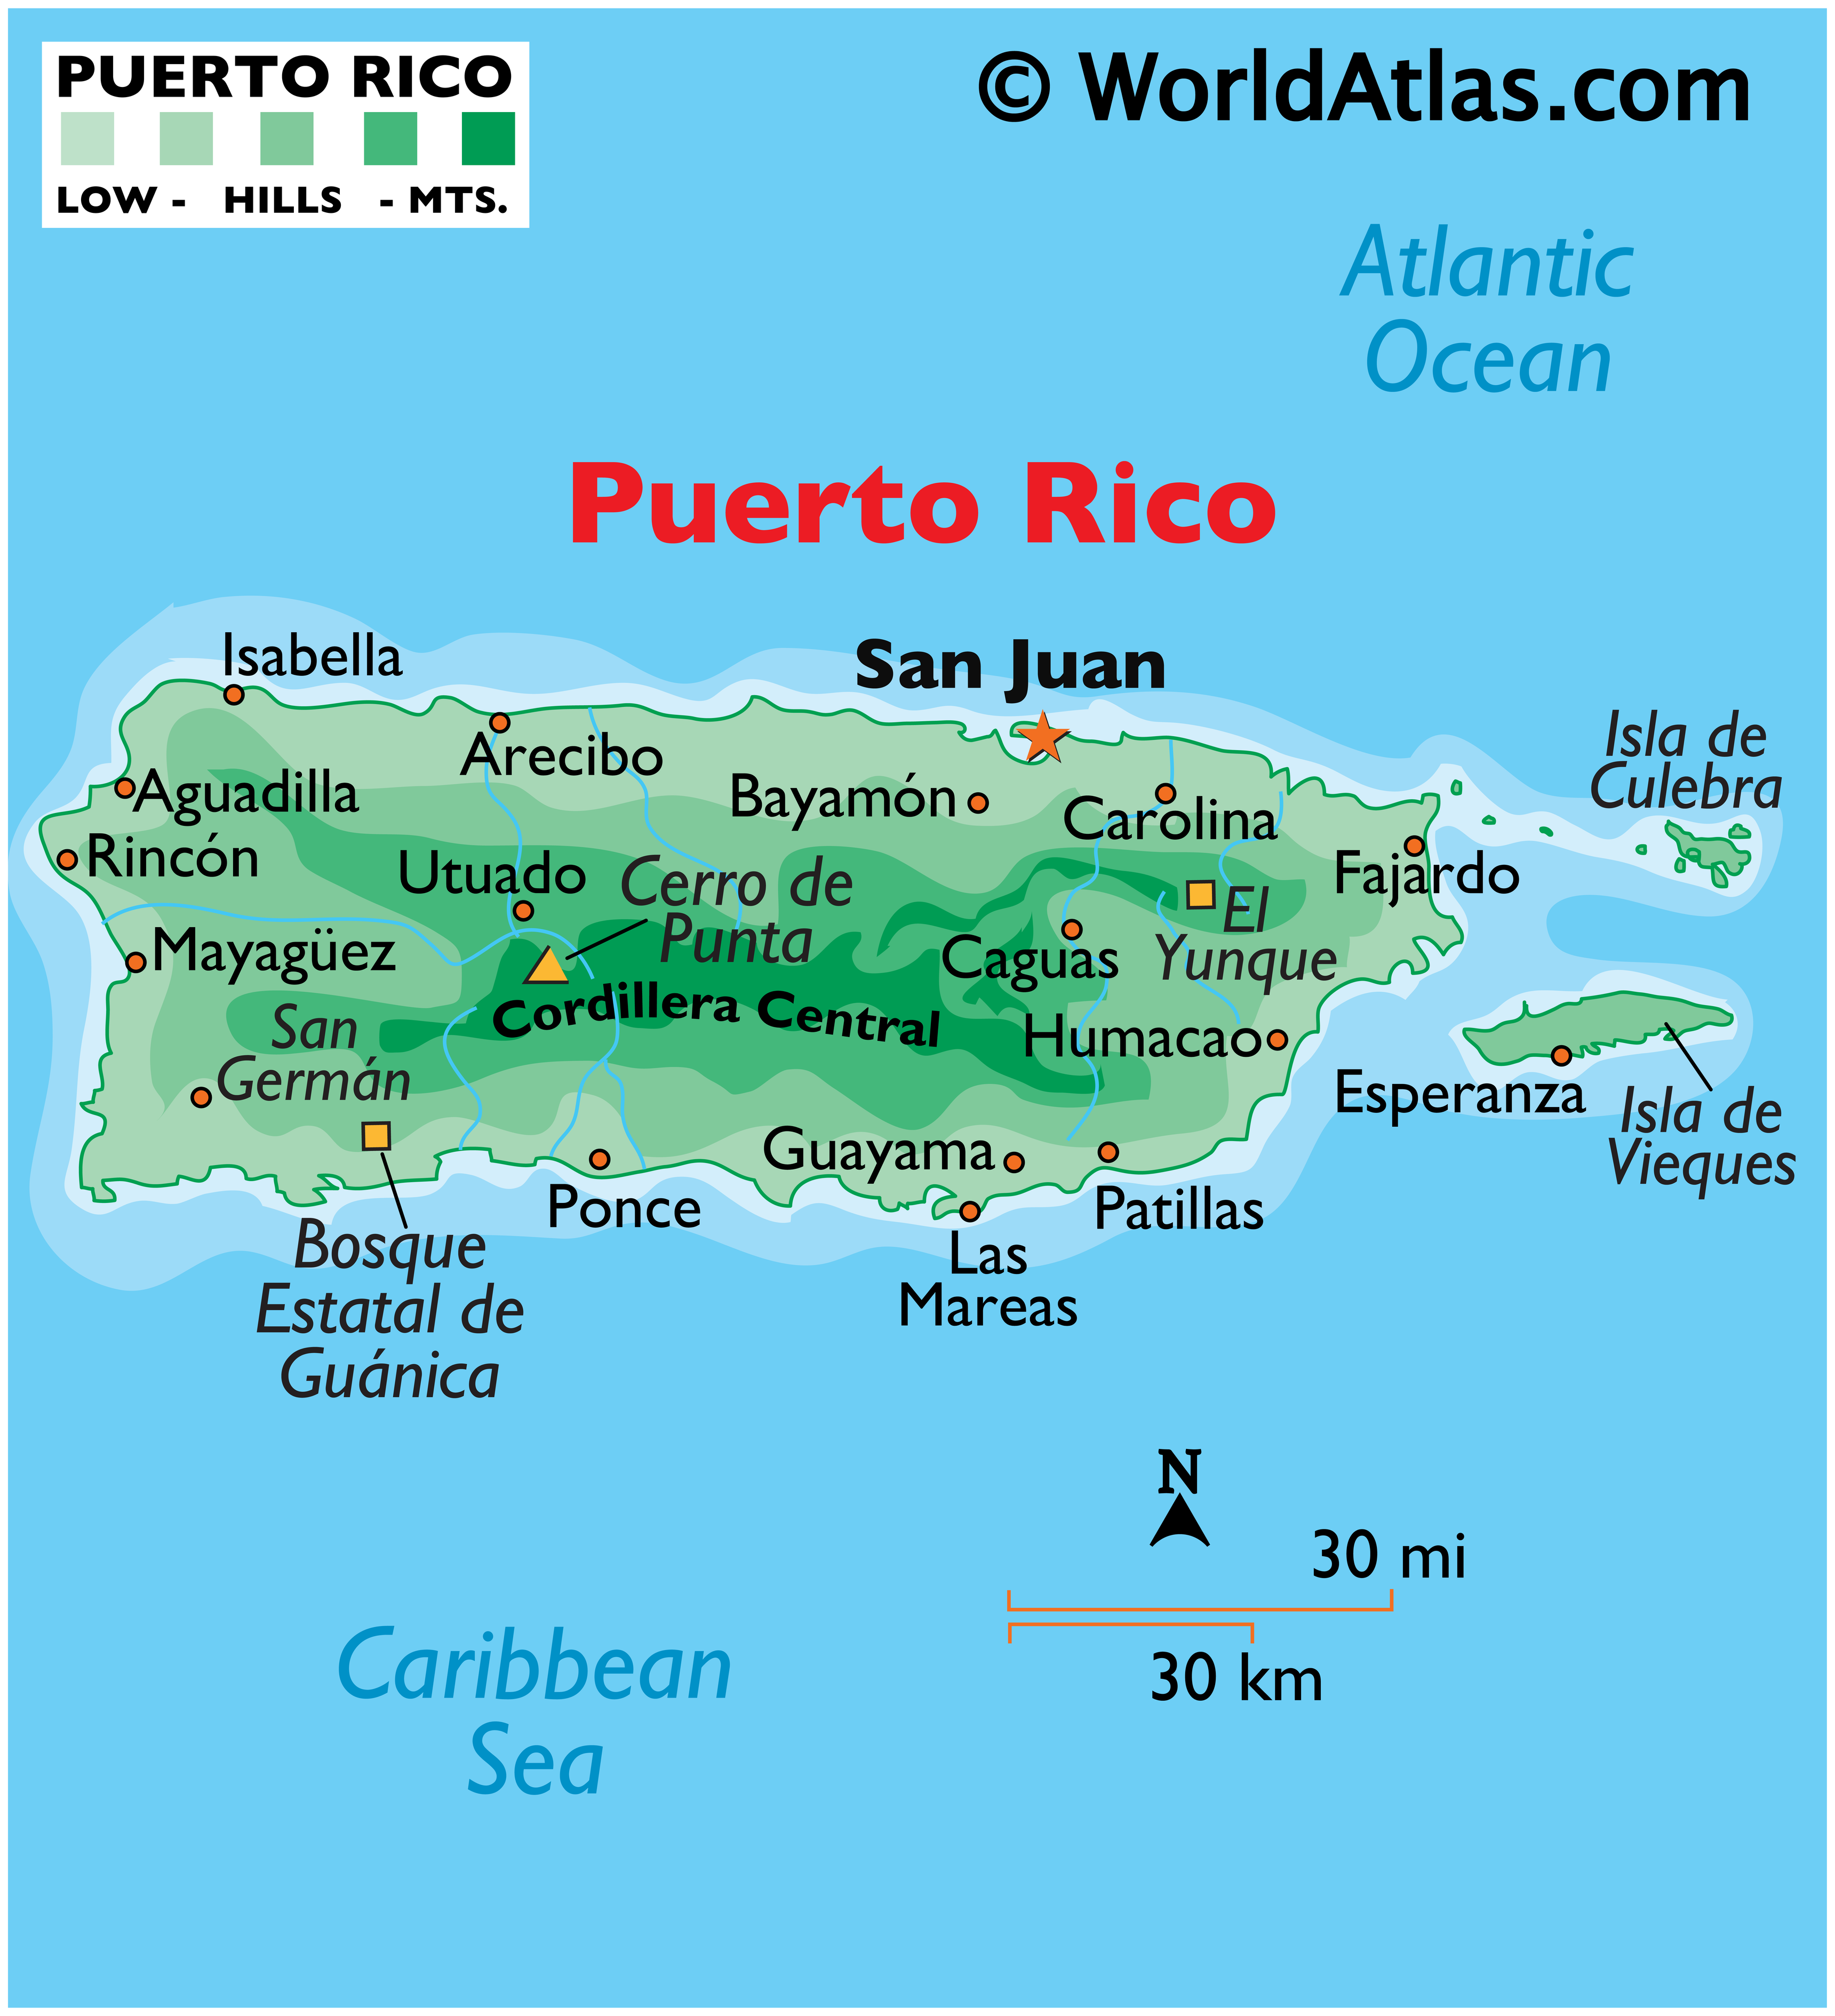 Map Of Puerto Rico And Surrounding Islands Puerto Rico Maps & Facts - World Atlas